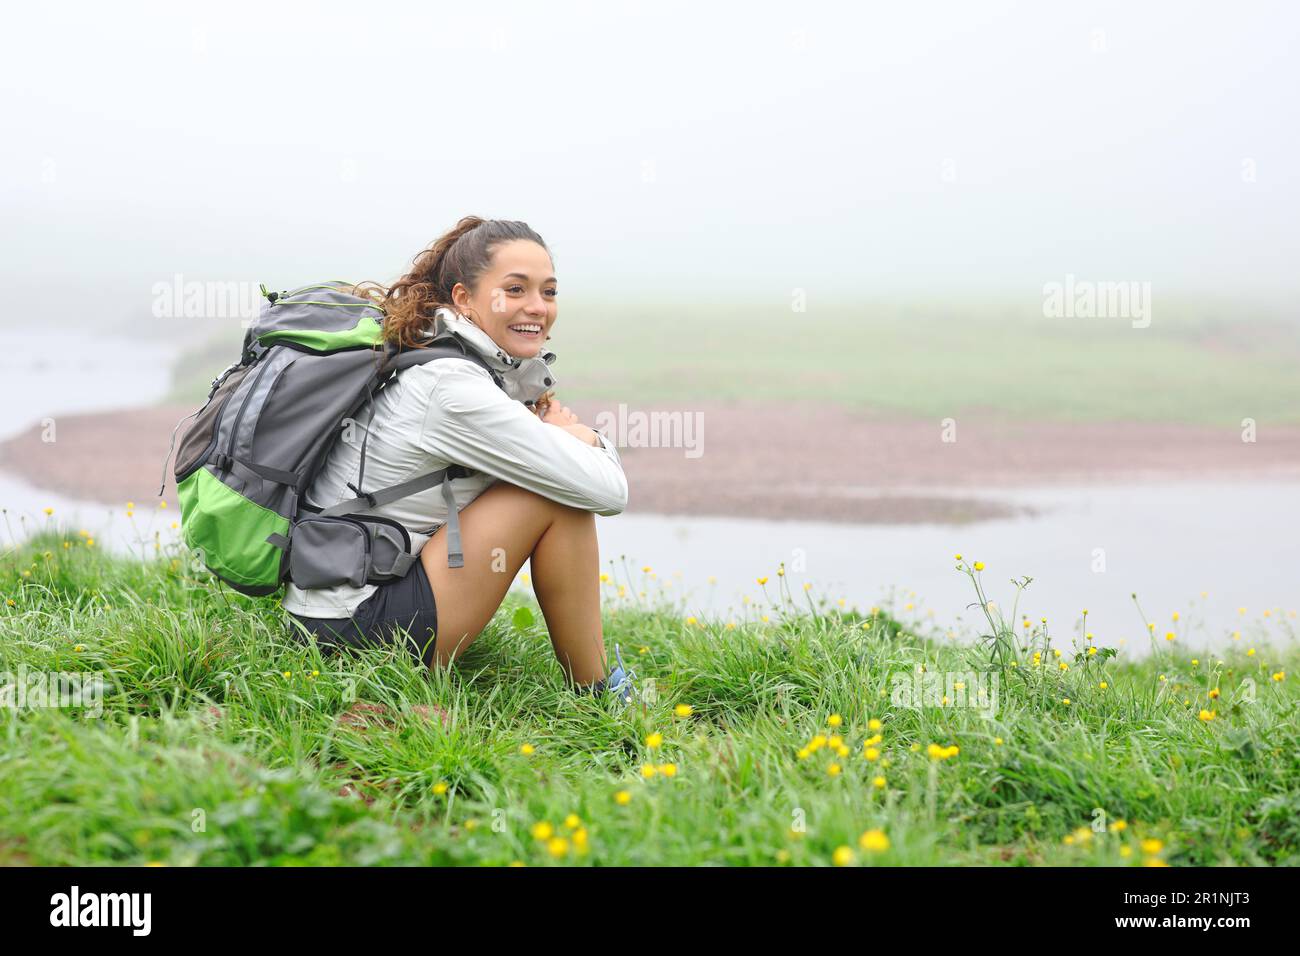 Hiker a foggy day sitting and contemplating resting in nature Stock Photo